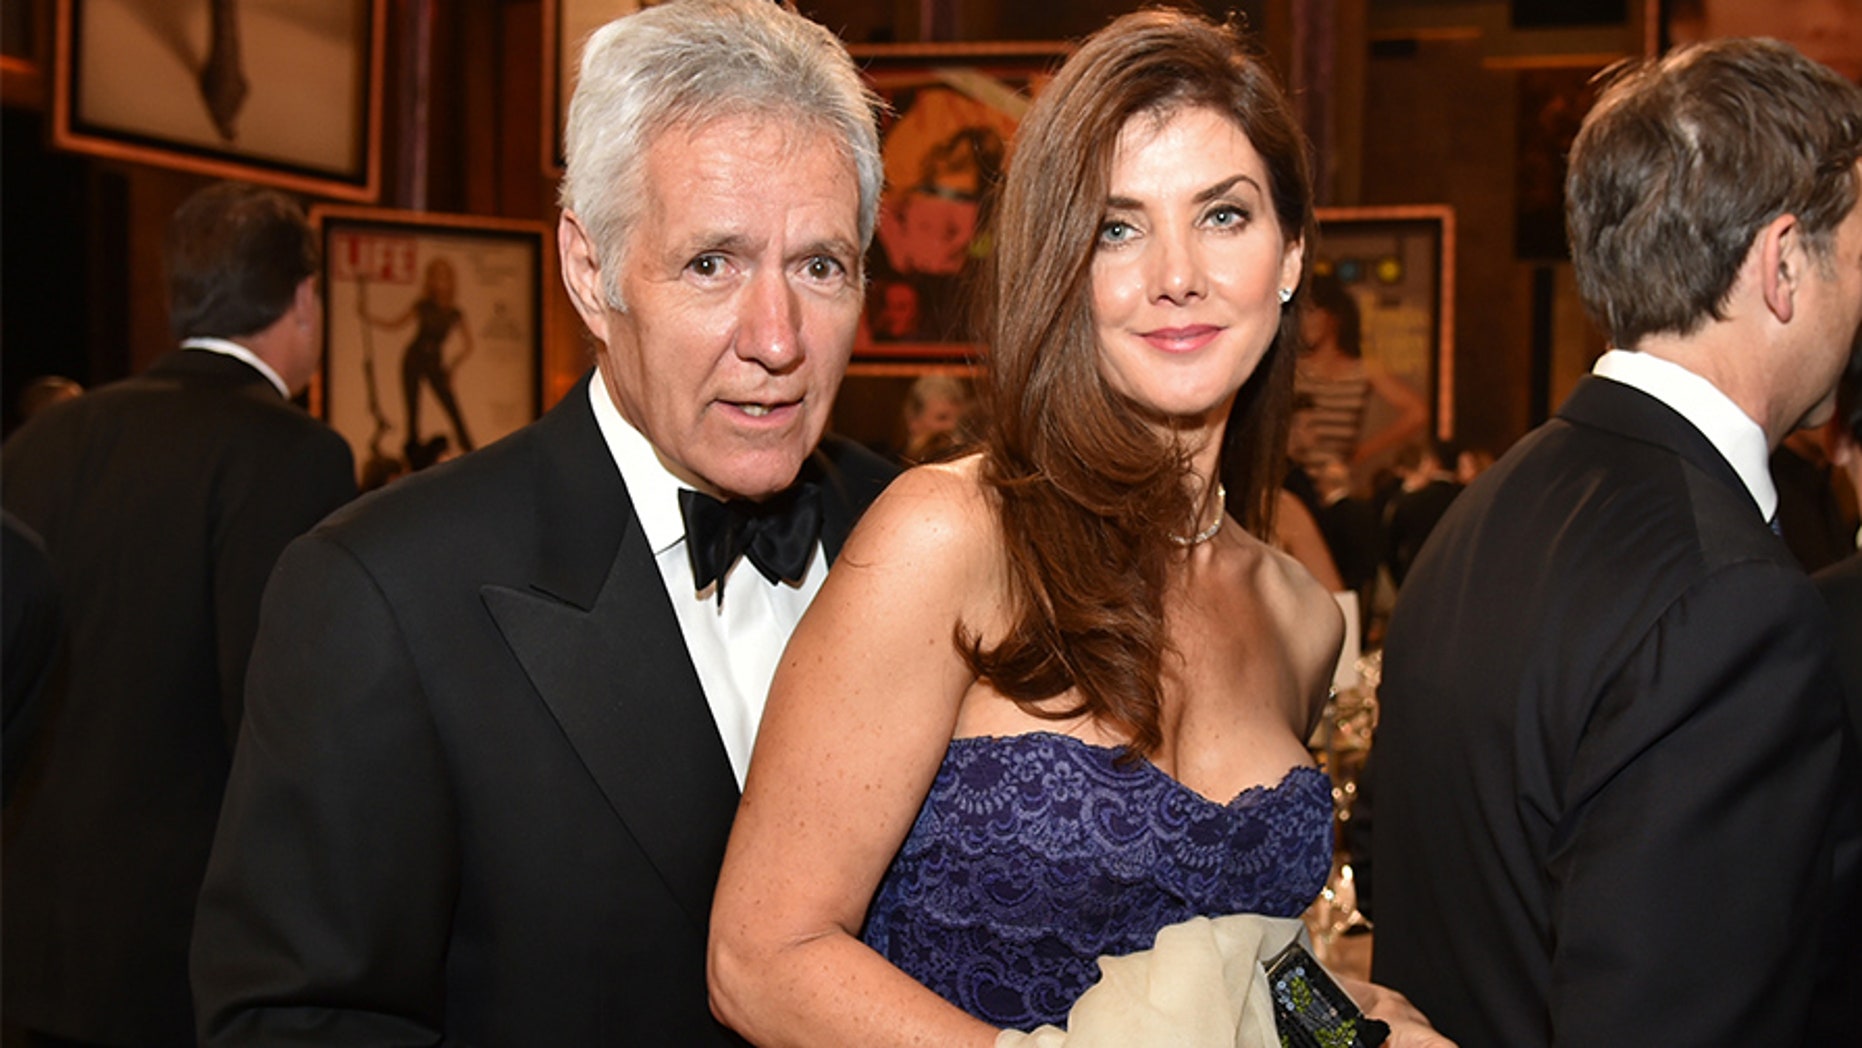 Alex Trebek opens up about his longtime marriage: ’29 years is pretty good’